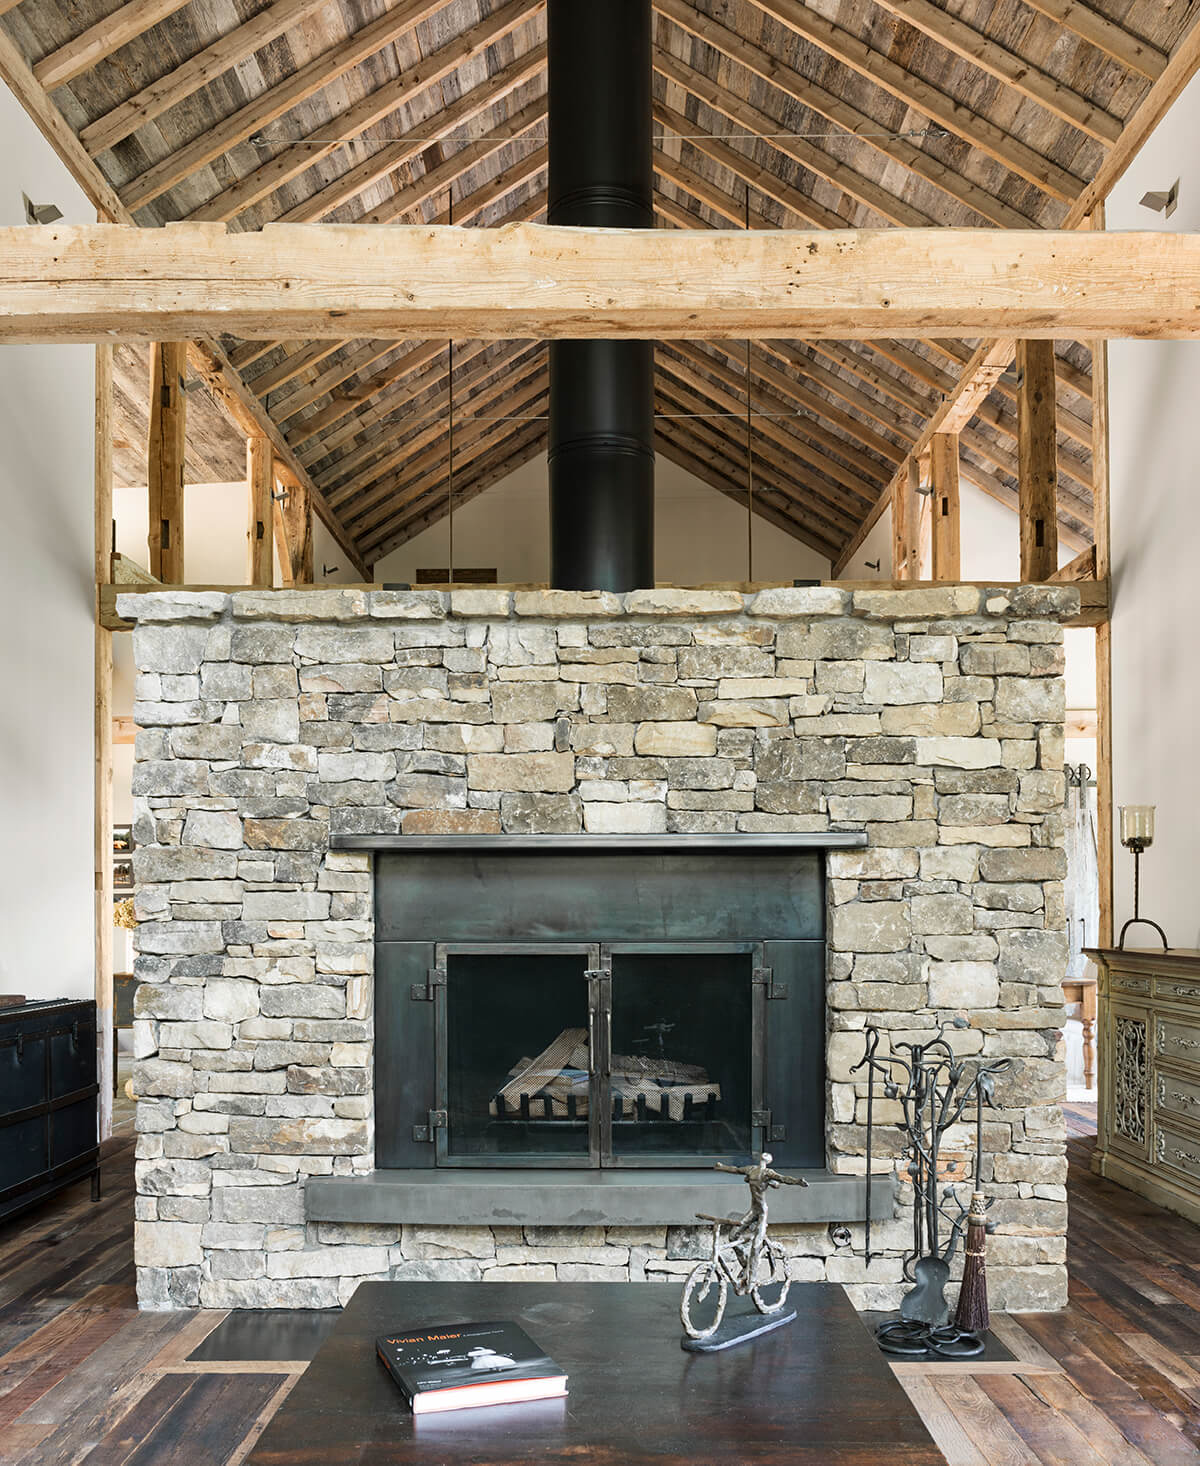 The Beaucatcher timber barn architectural build